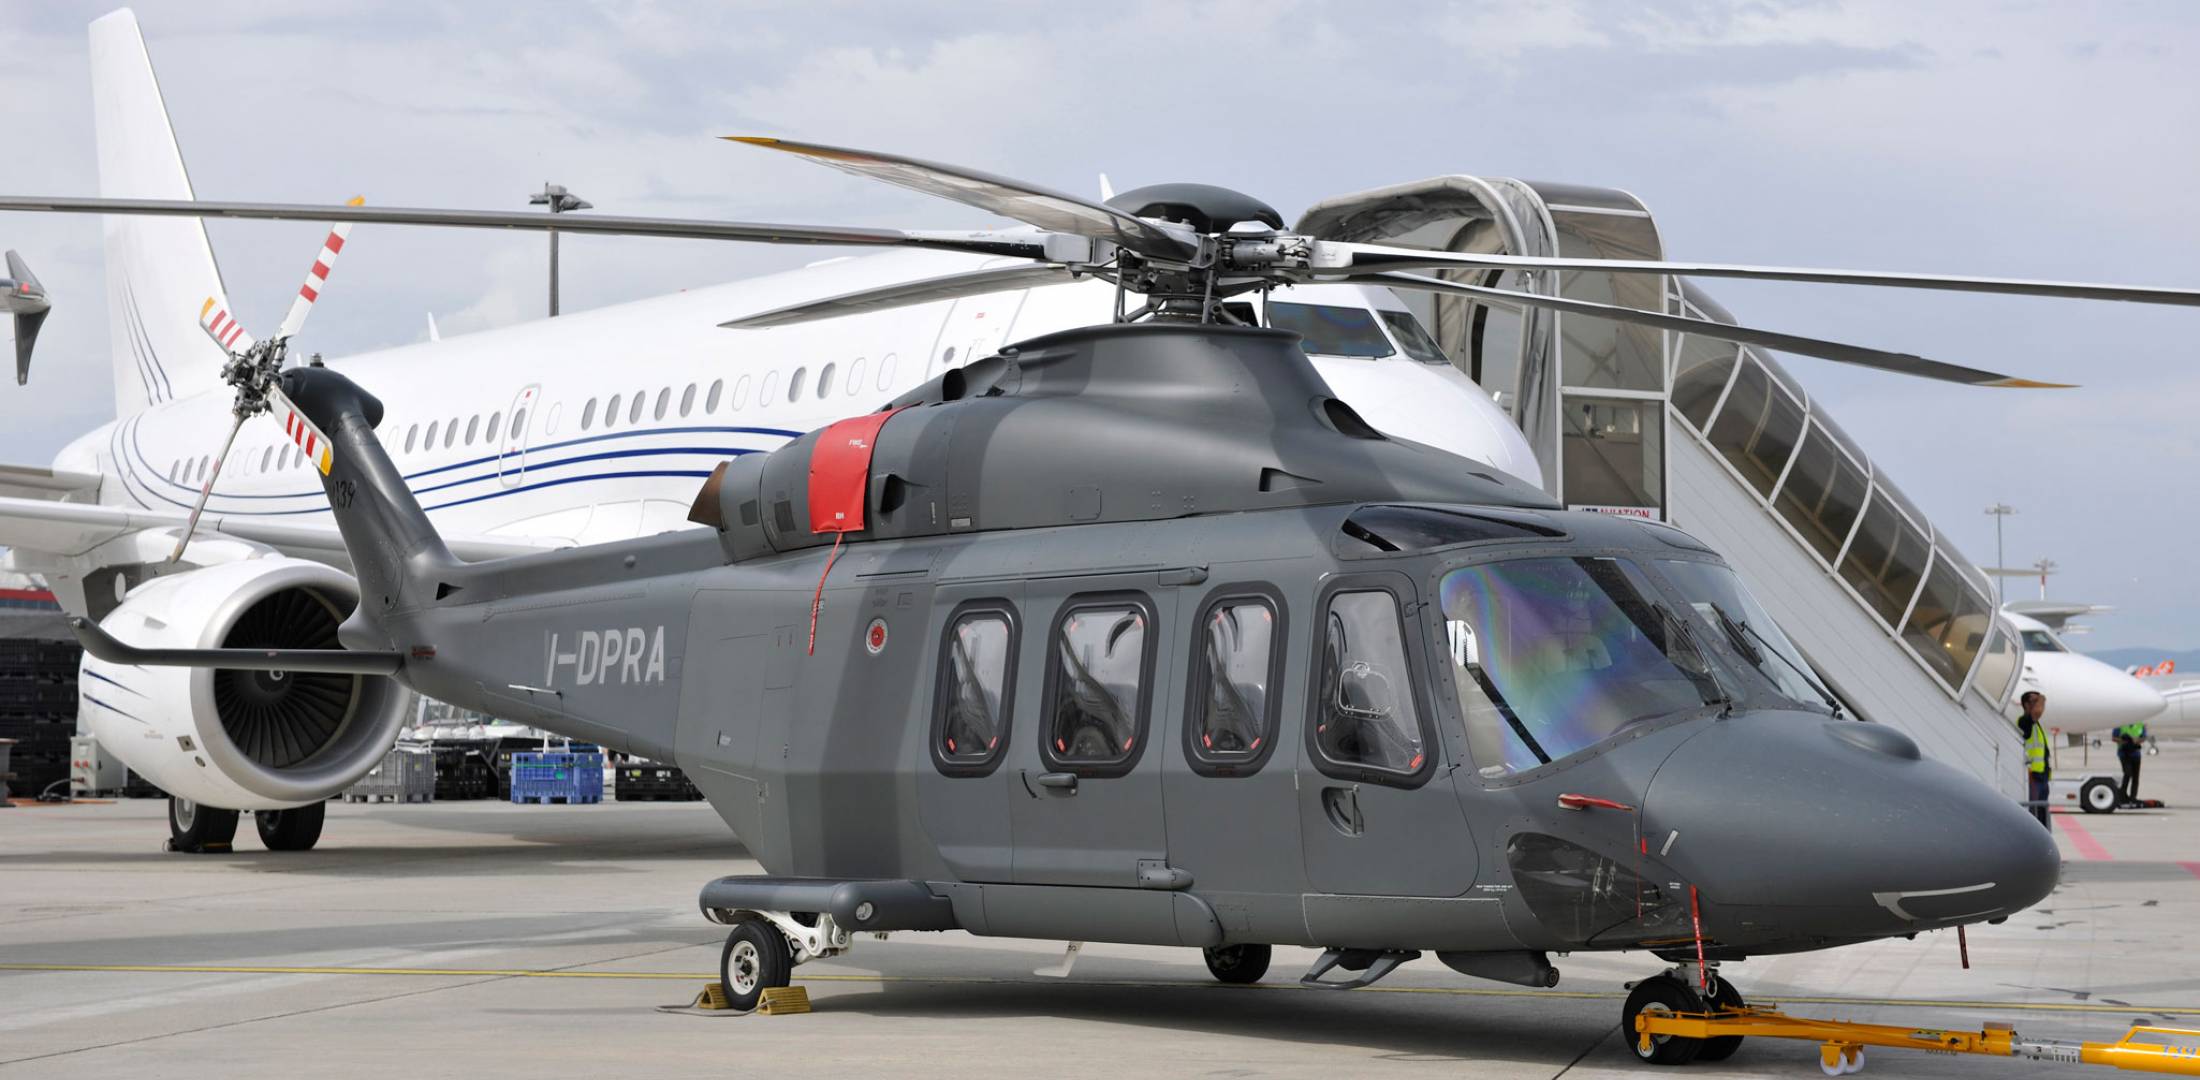 Leonardo Helicopters Logo - Leonardo Helicopters Sees Solid Growth in Europe | Business Aviation ...